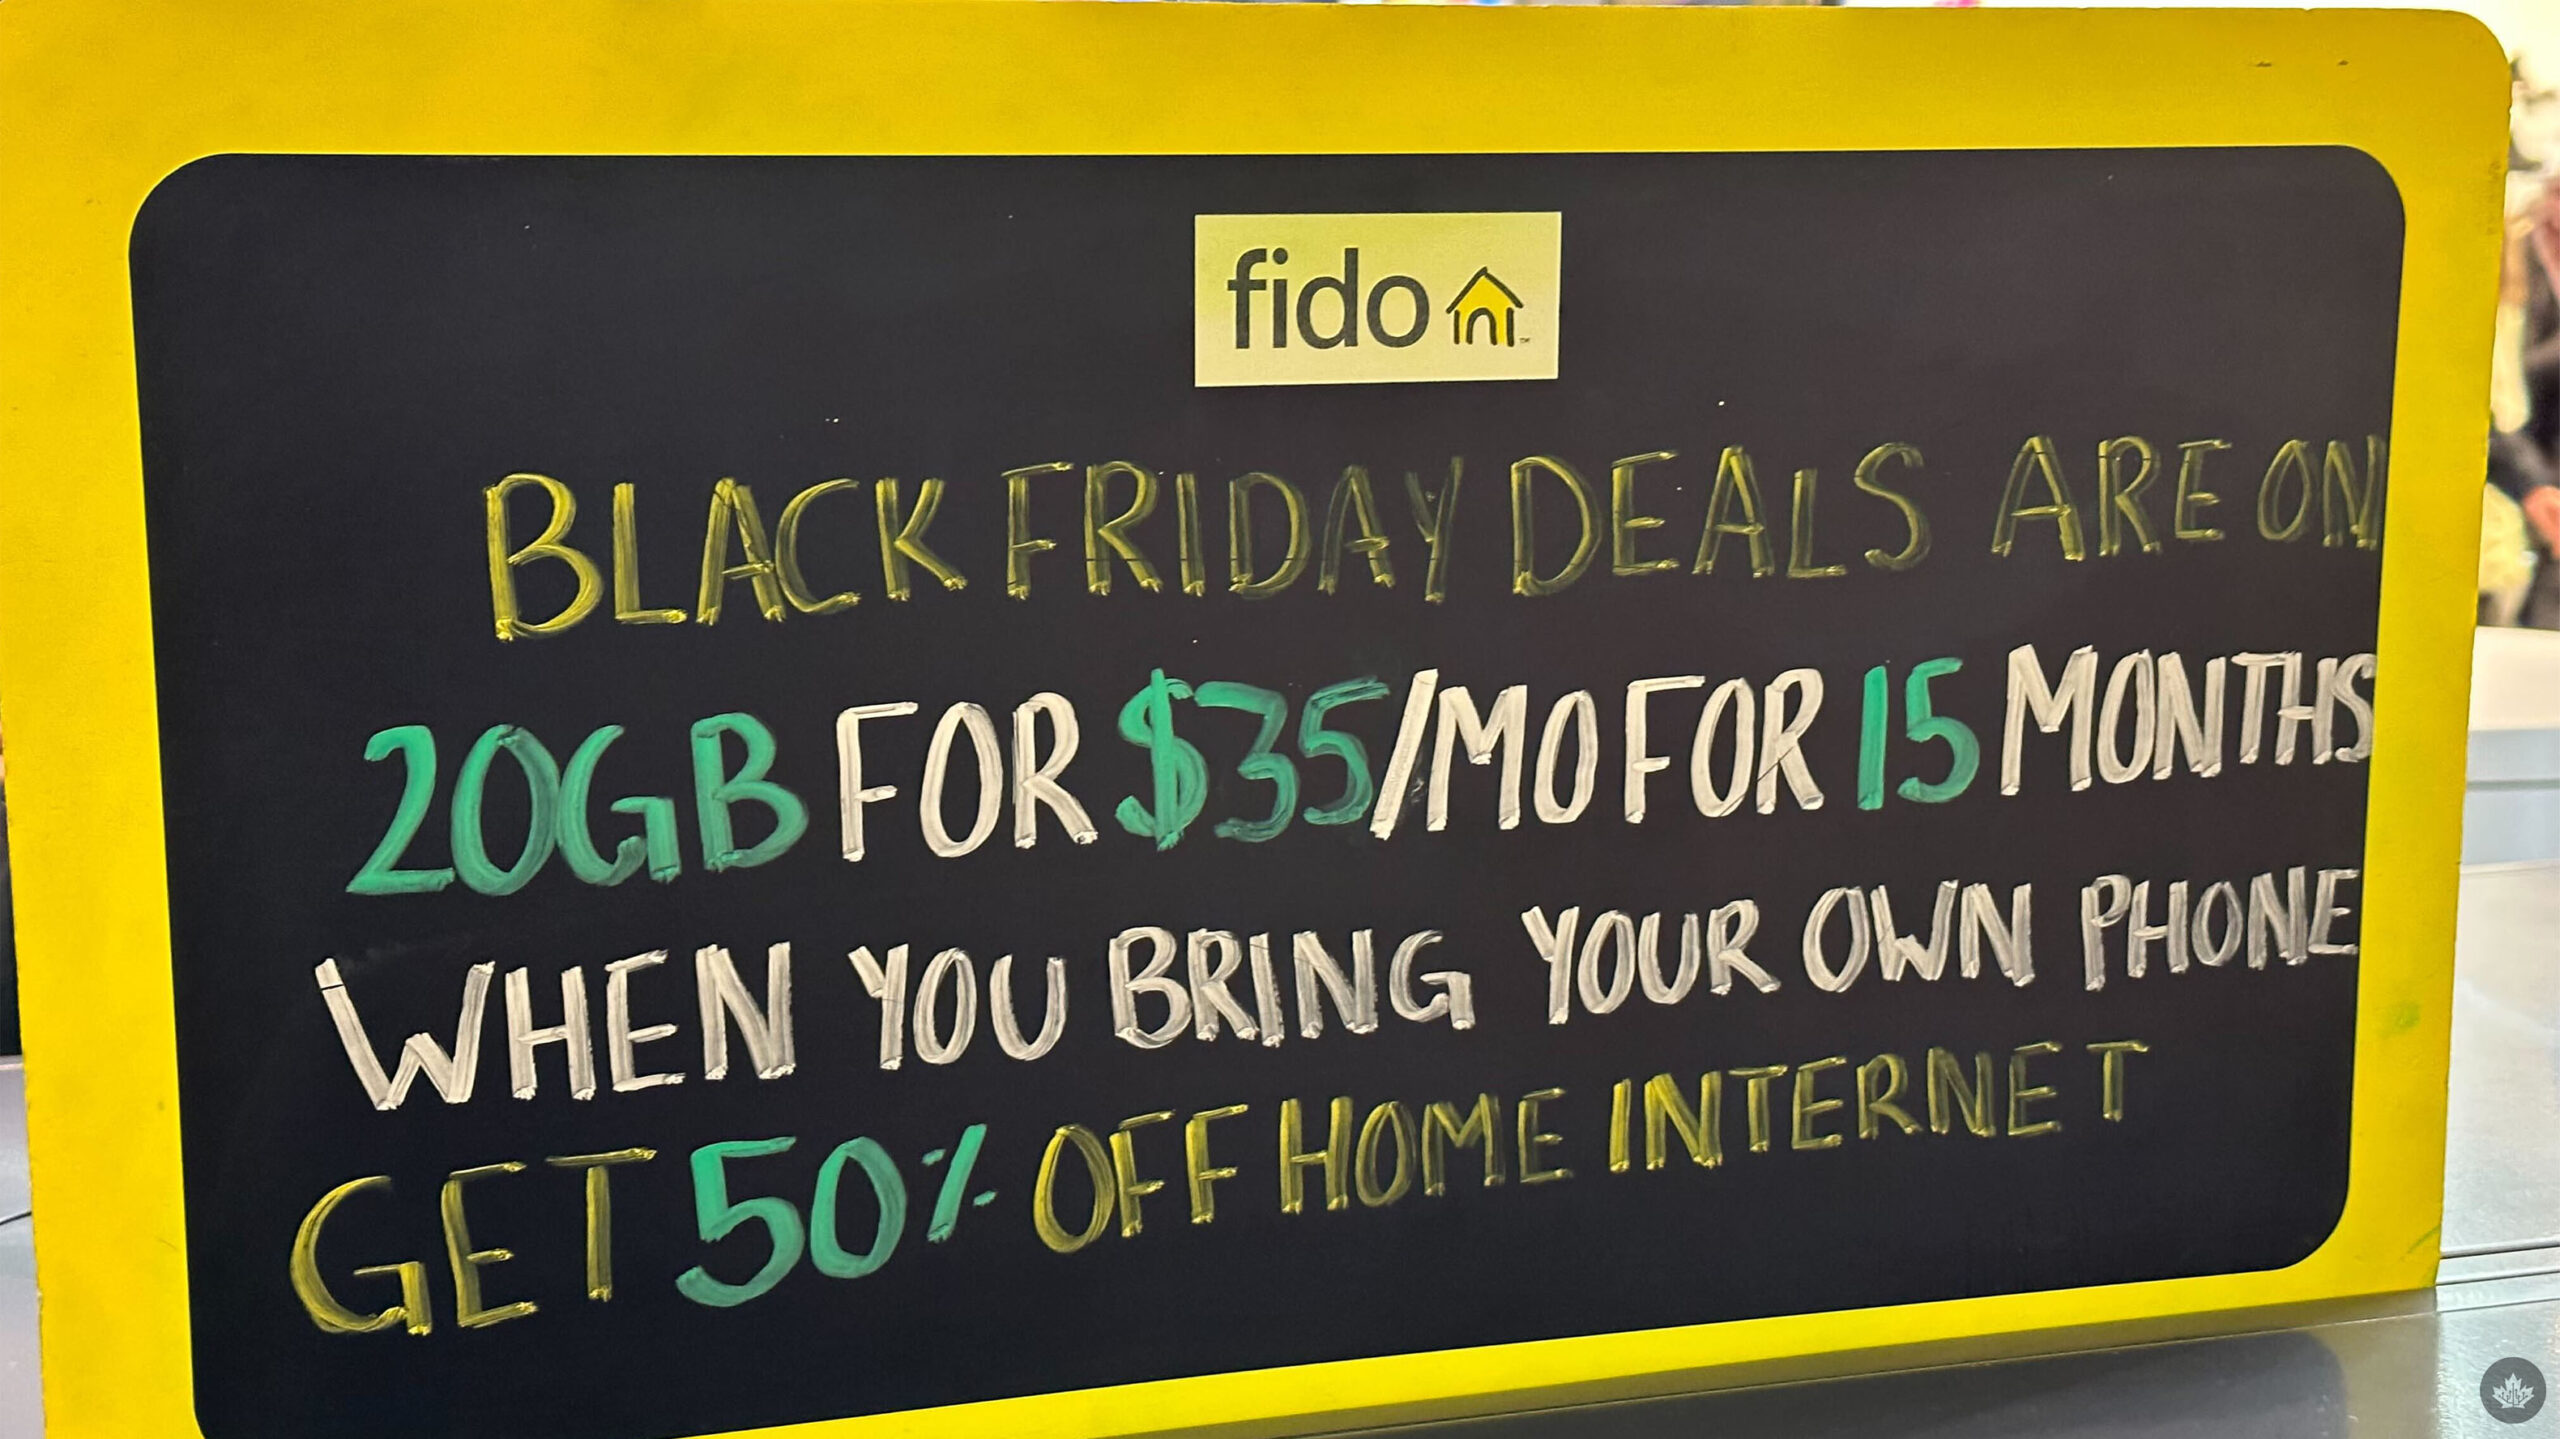 Canadian wireless providers' Black Friday plans haven't impressed me yet